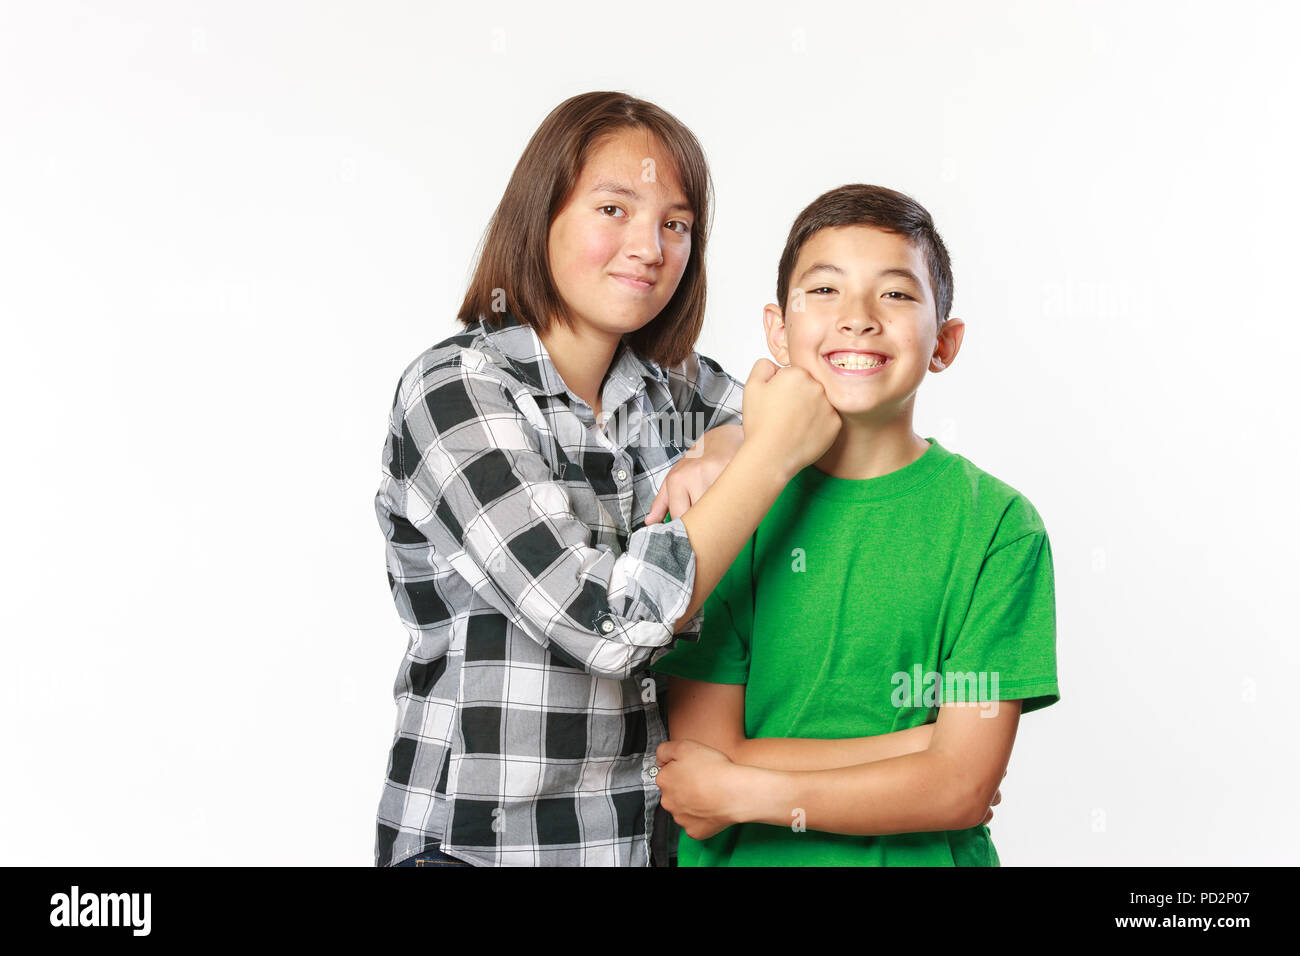 265300 Sibling Poses Stock Photos Pictures  RoyaltyFree Images  iStock